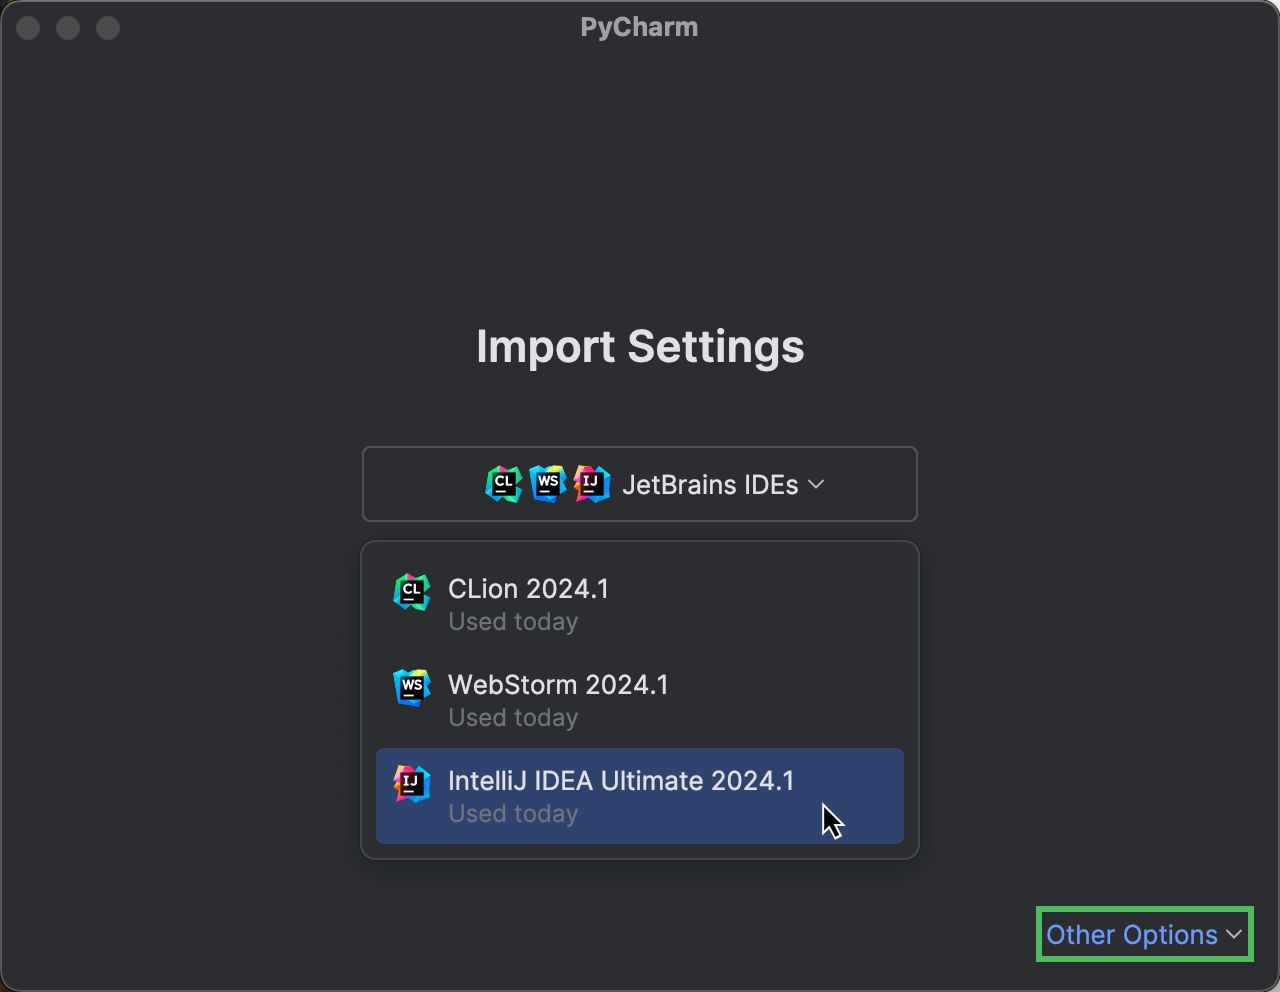 The Import Settings dialog with the opened drop-down list